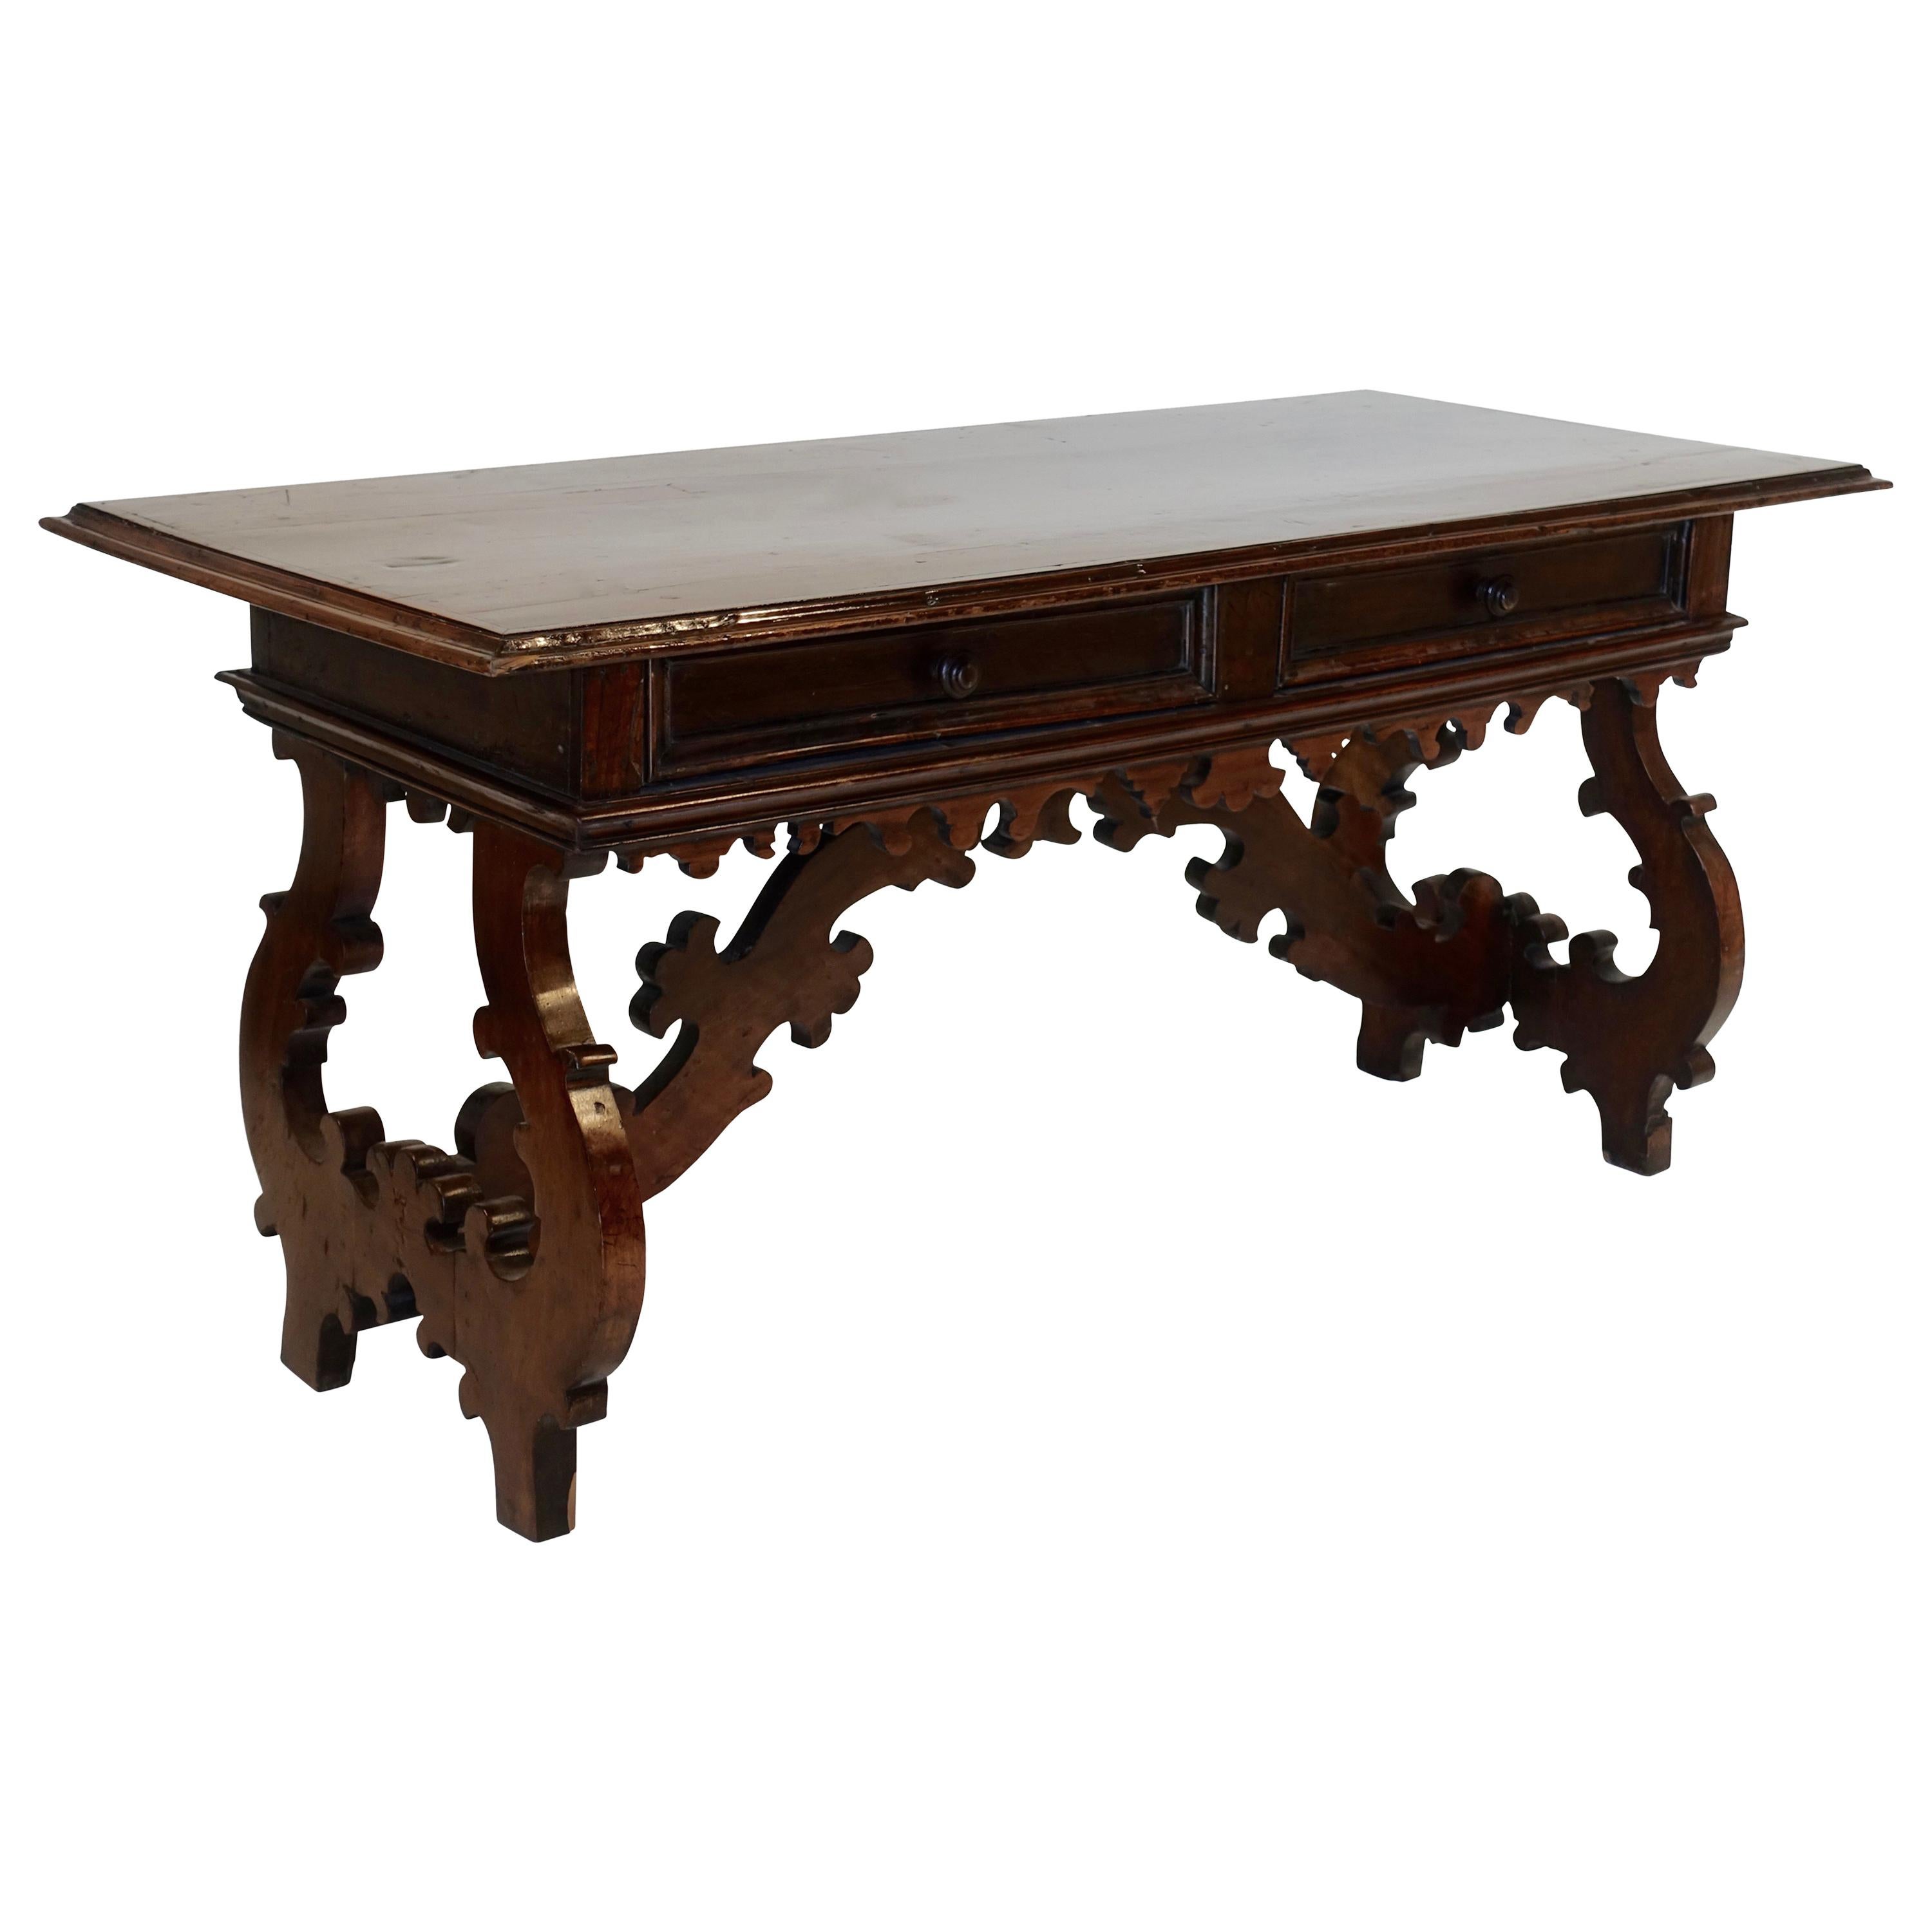 Spanish Walnut Library Table Desk with Two Drawers, 18th Century